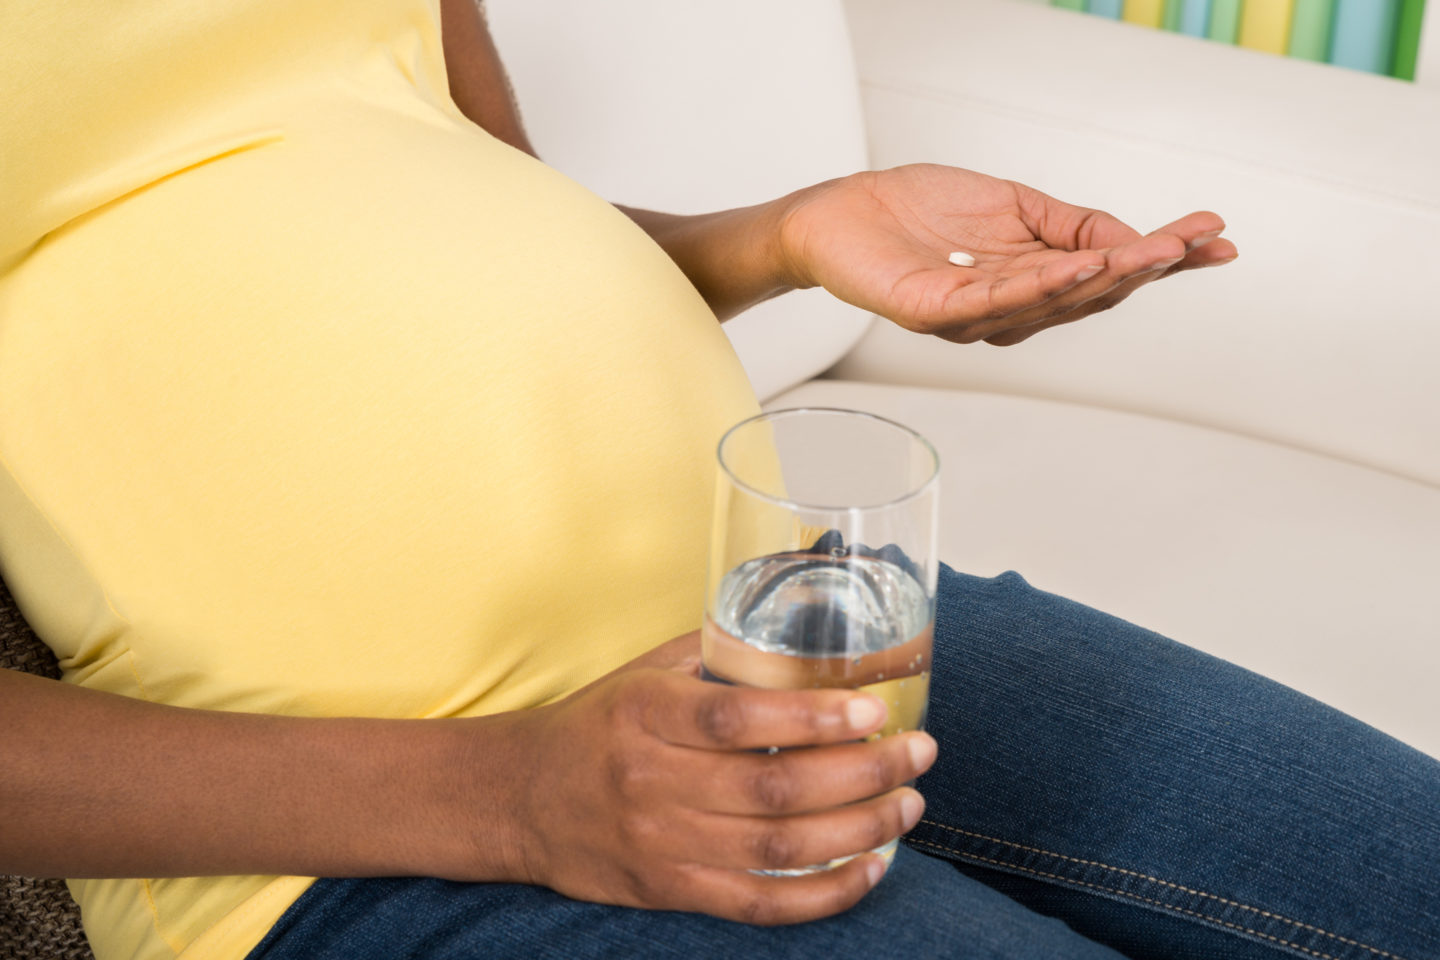 Is Acetaminophen Use While Pregnant Harmful?